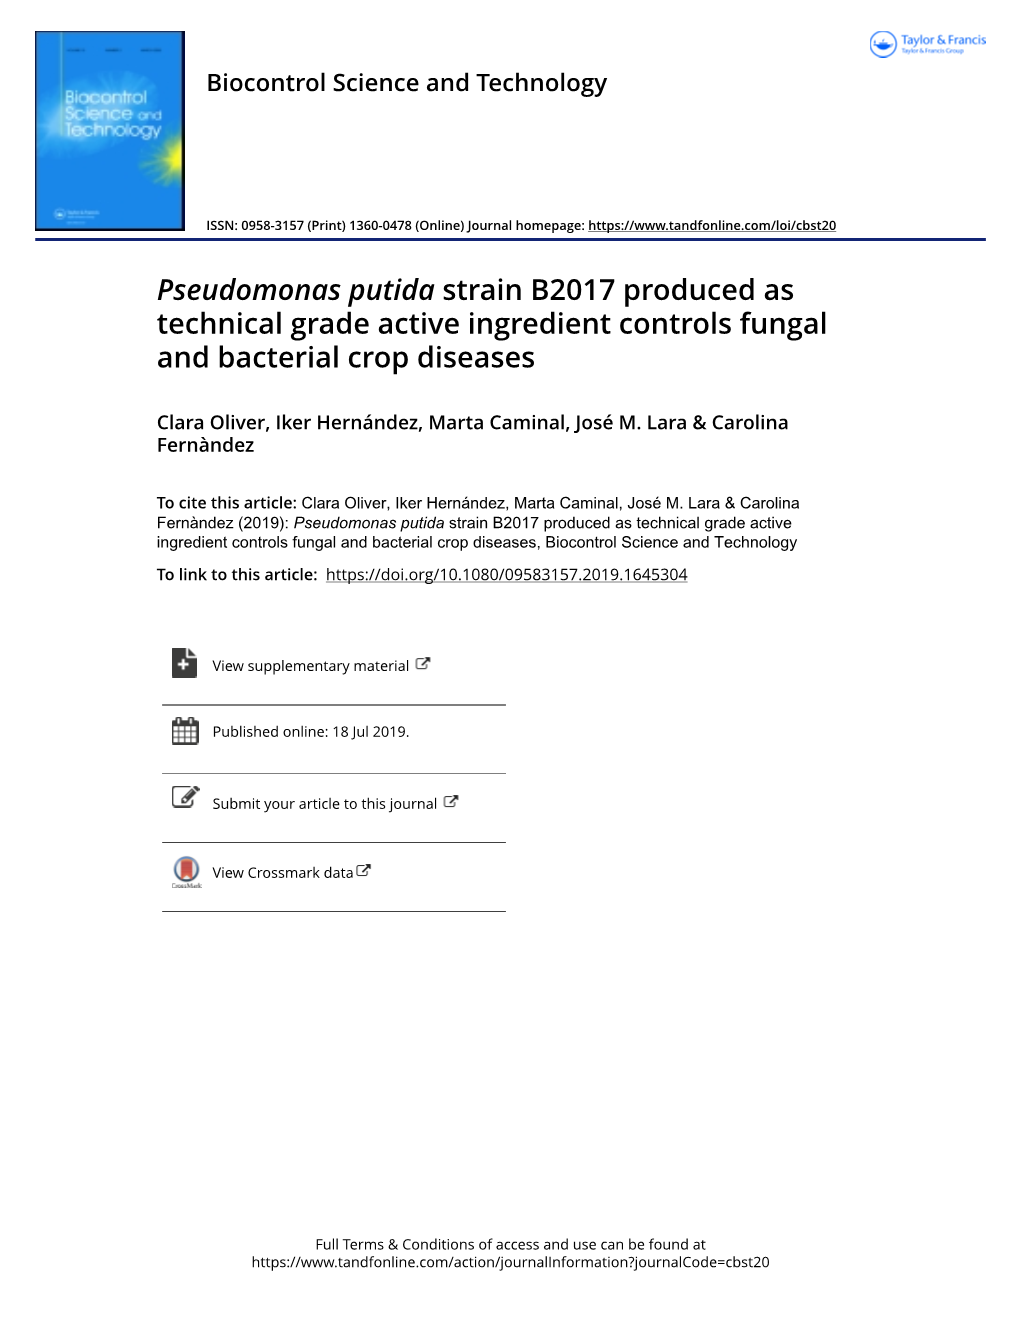 Pseudomonas Putida Strain B2017 Produced As Technical Grade Active Ingredient Controls Fungal and Bacterial Crop Diseases